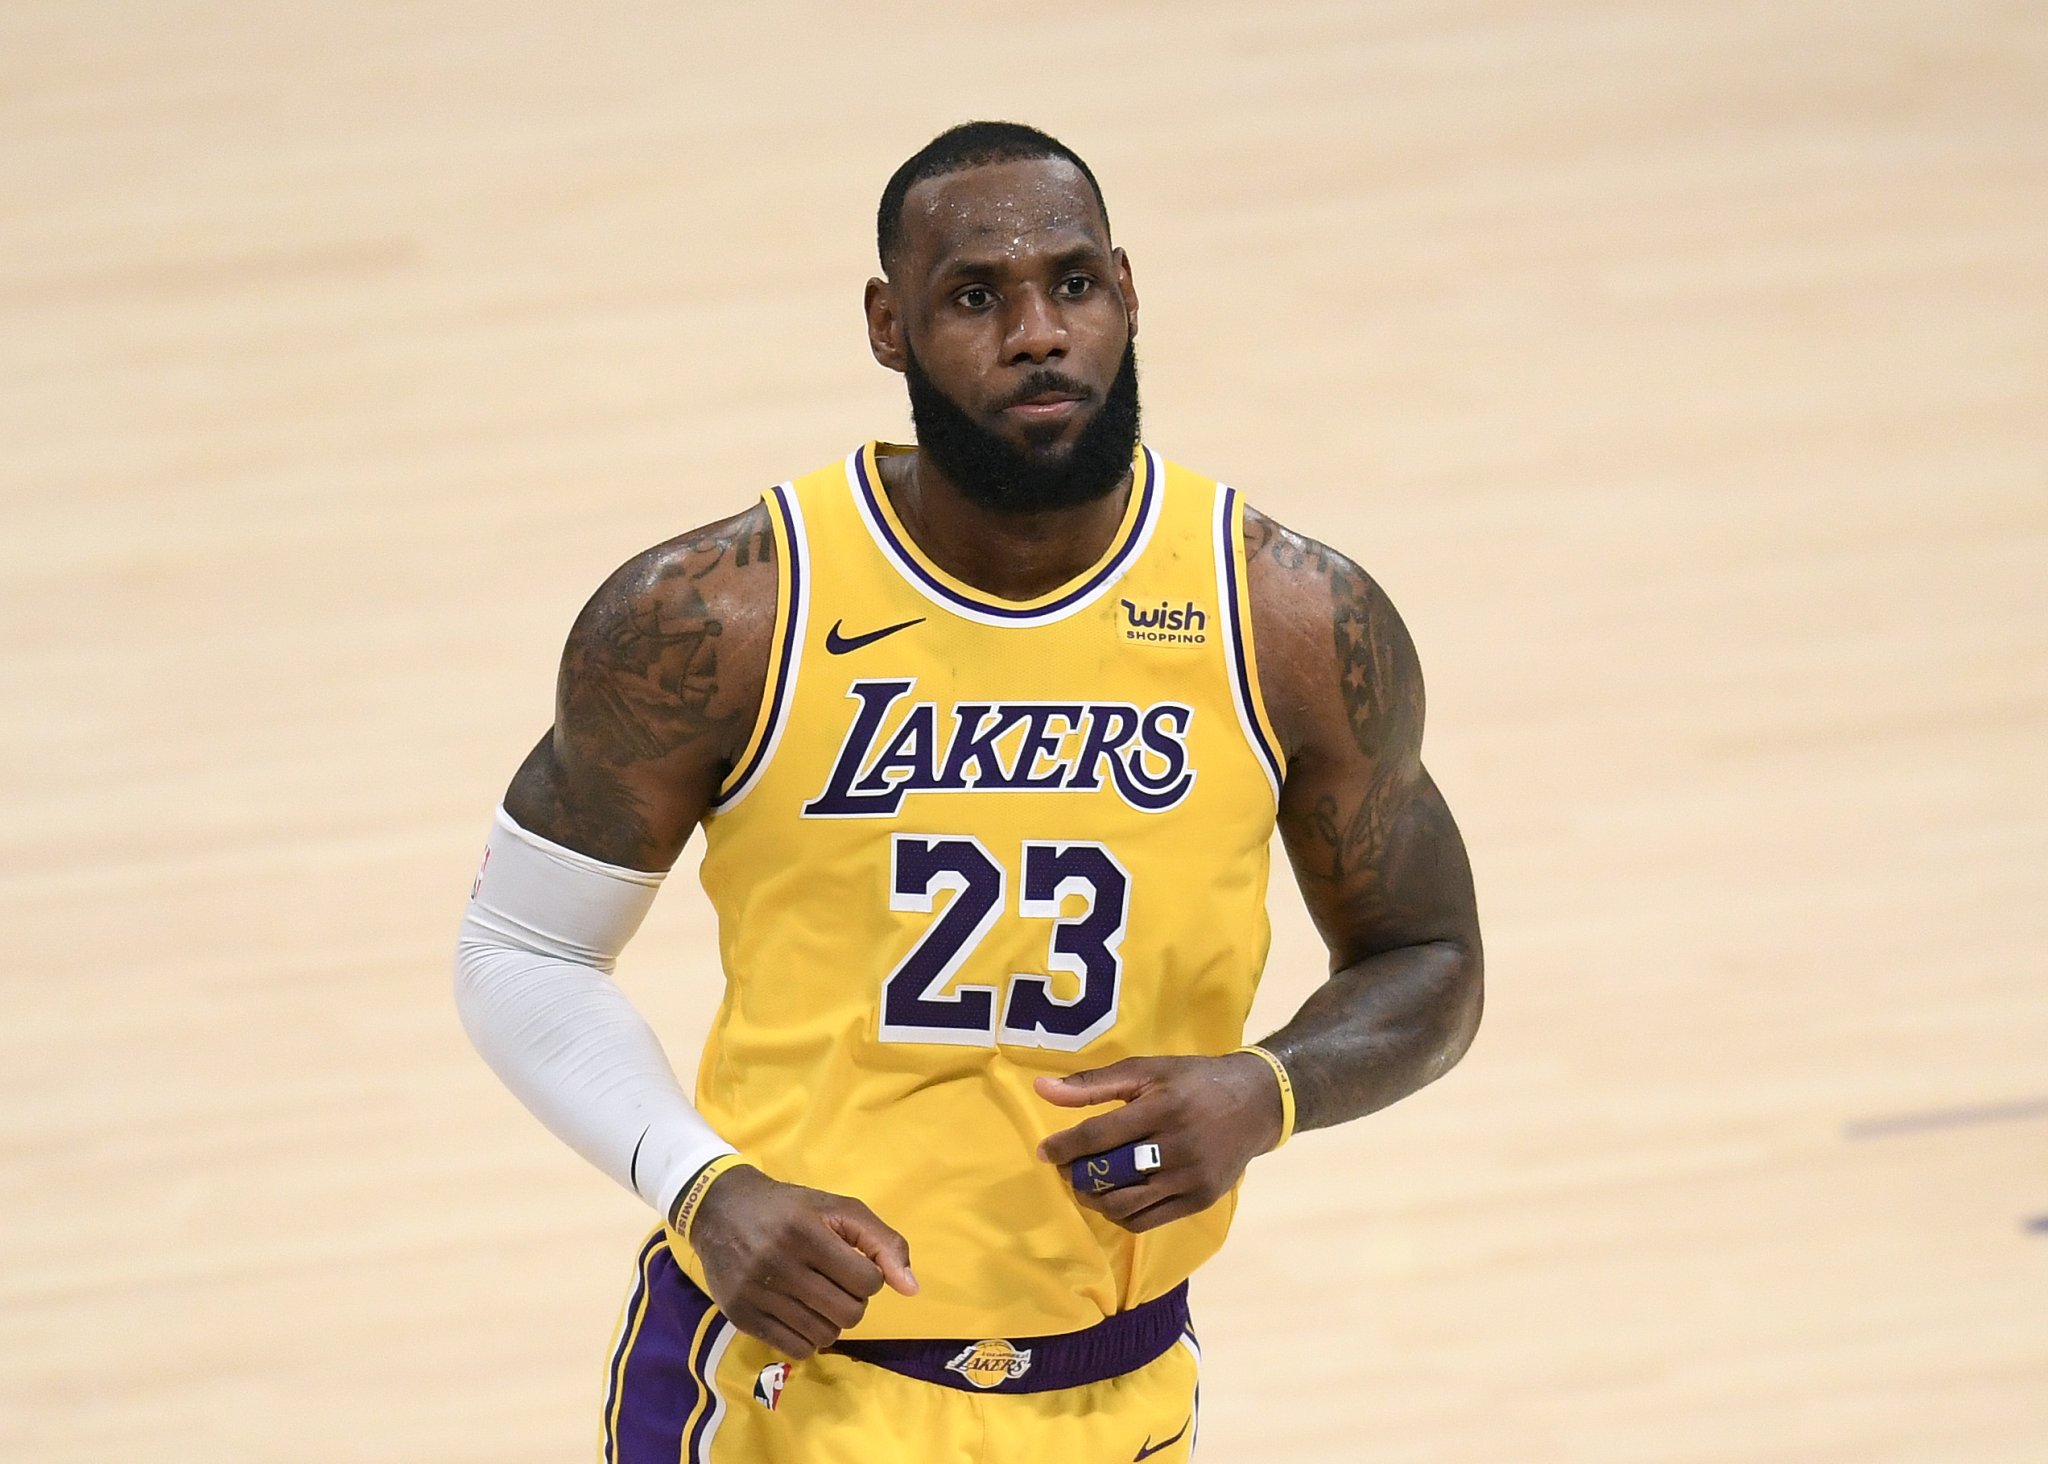 NBA Twitter Mercilessly Mocks LeBron James With Cancun Memes After Lakers Get Eliminated From Playoffs